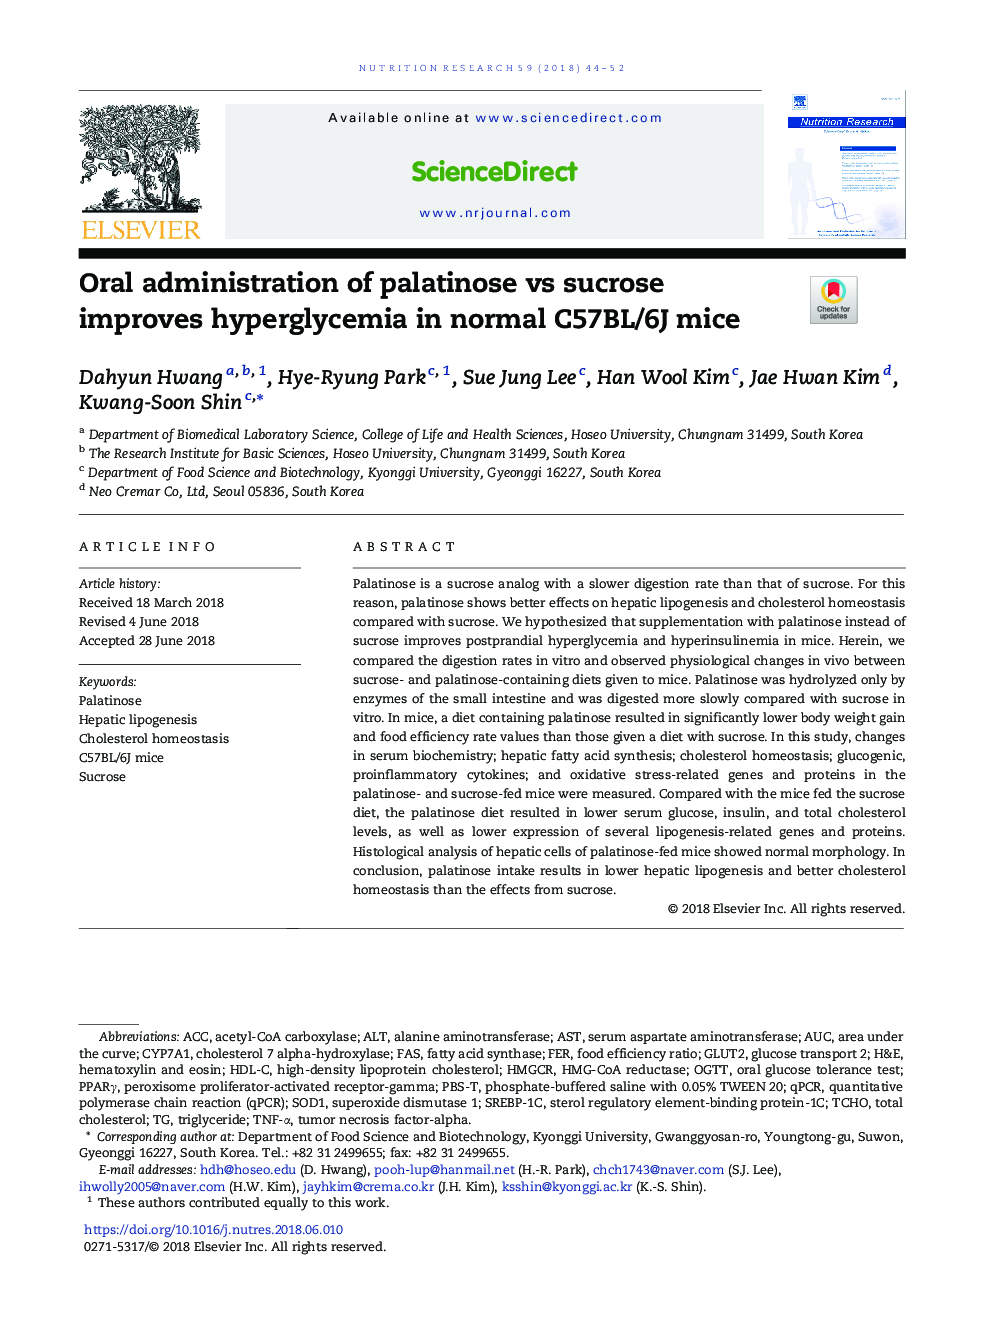 Oral administration of palatinose vs sucrose improves hyperglycemia in normal C57BL/6J mice